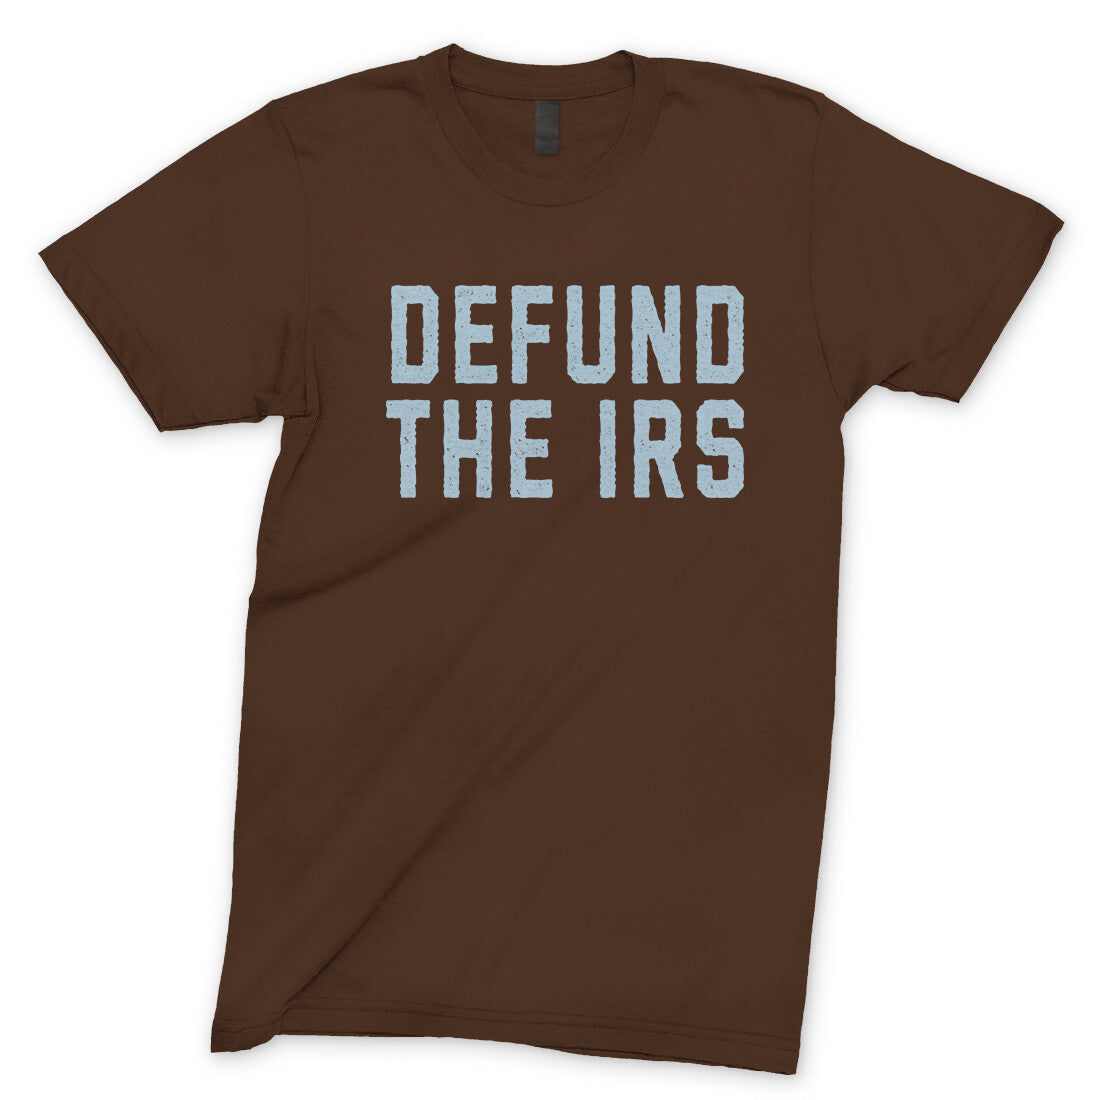 Defund the IRS in Dark Chocolate Color